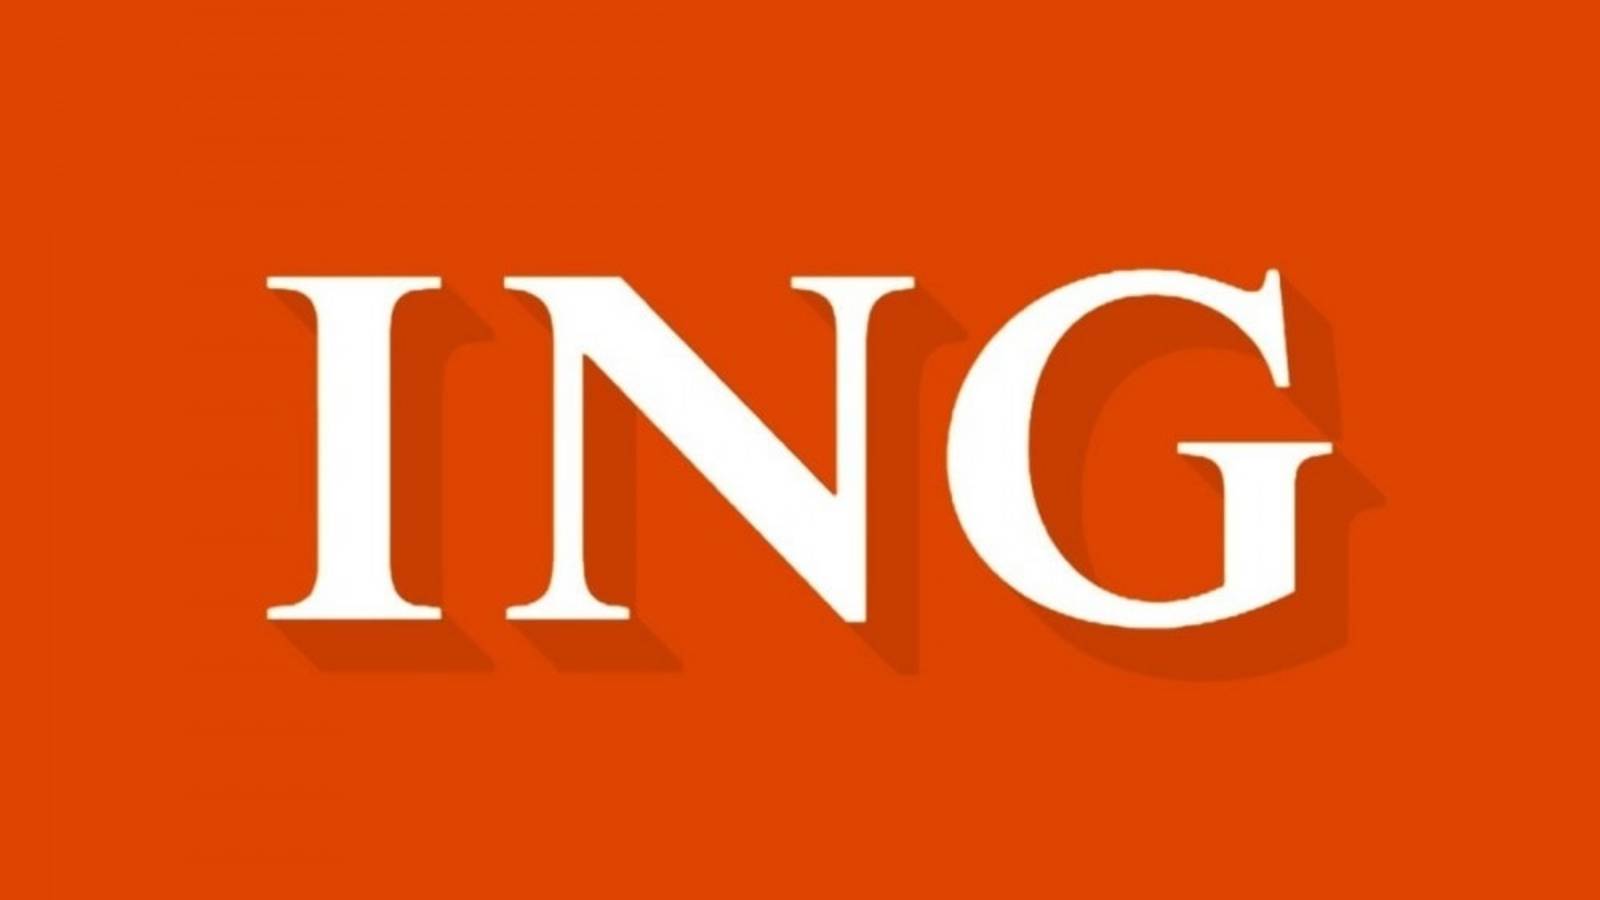 ING Bank protectie